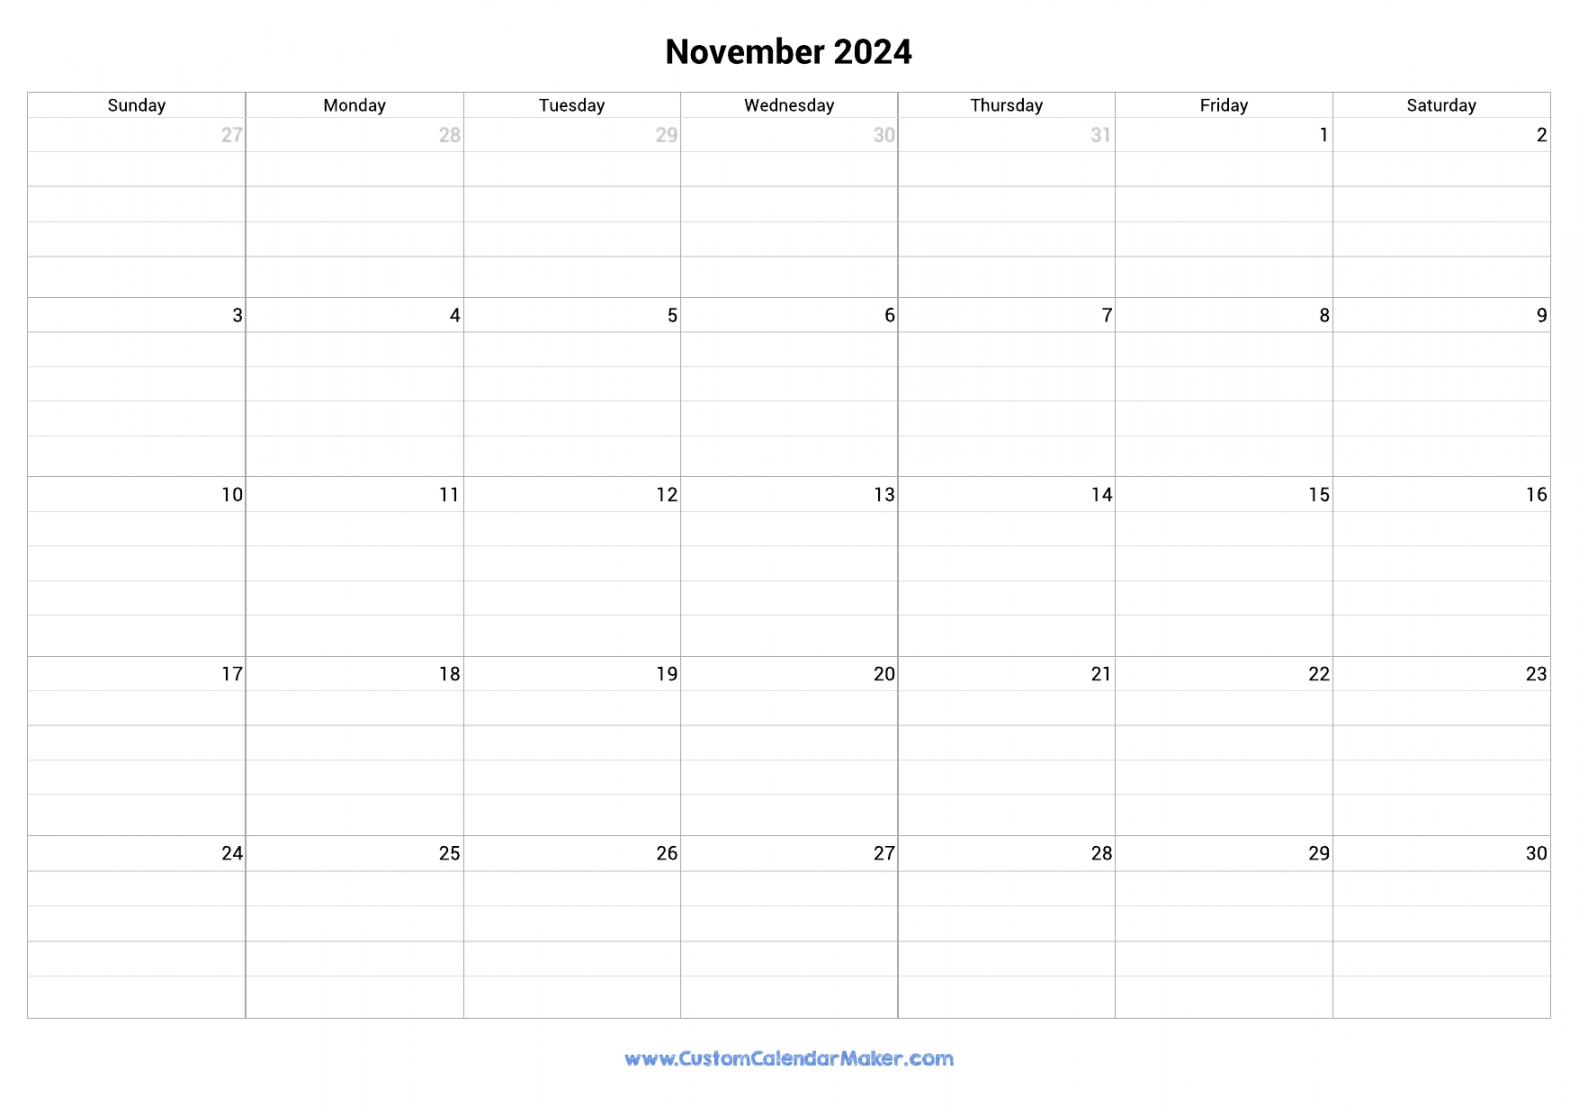 November Fillable Calendar Grid With Lines